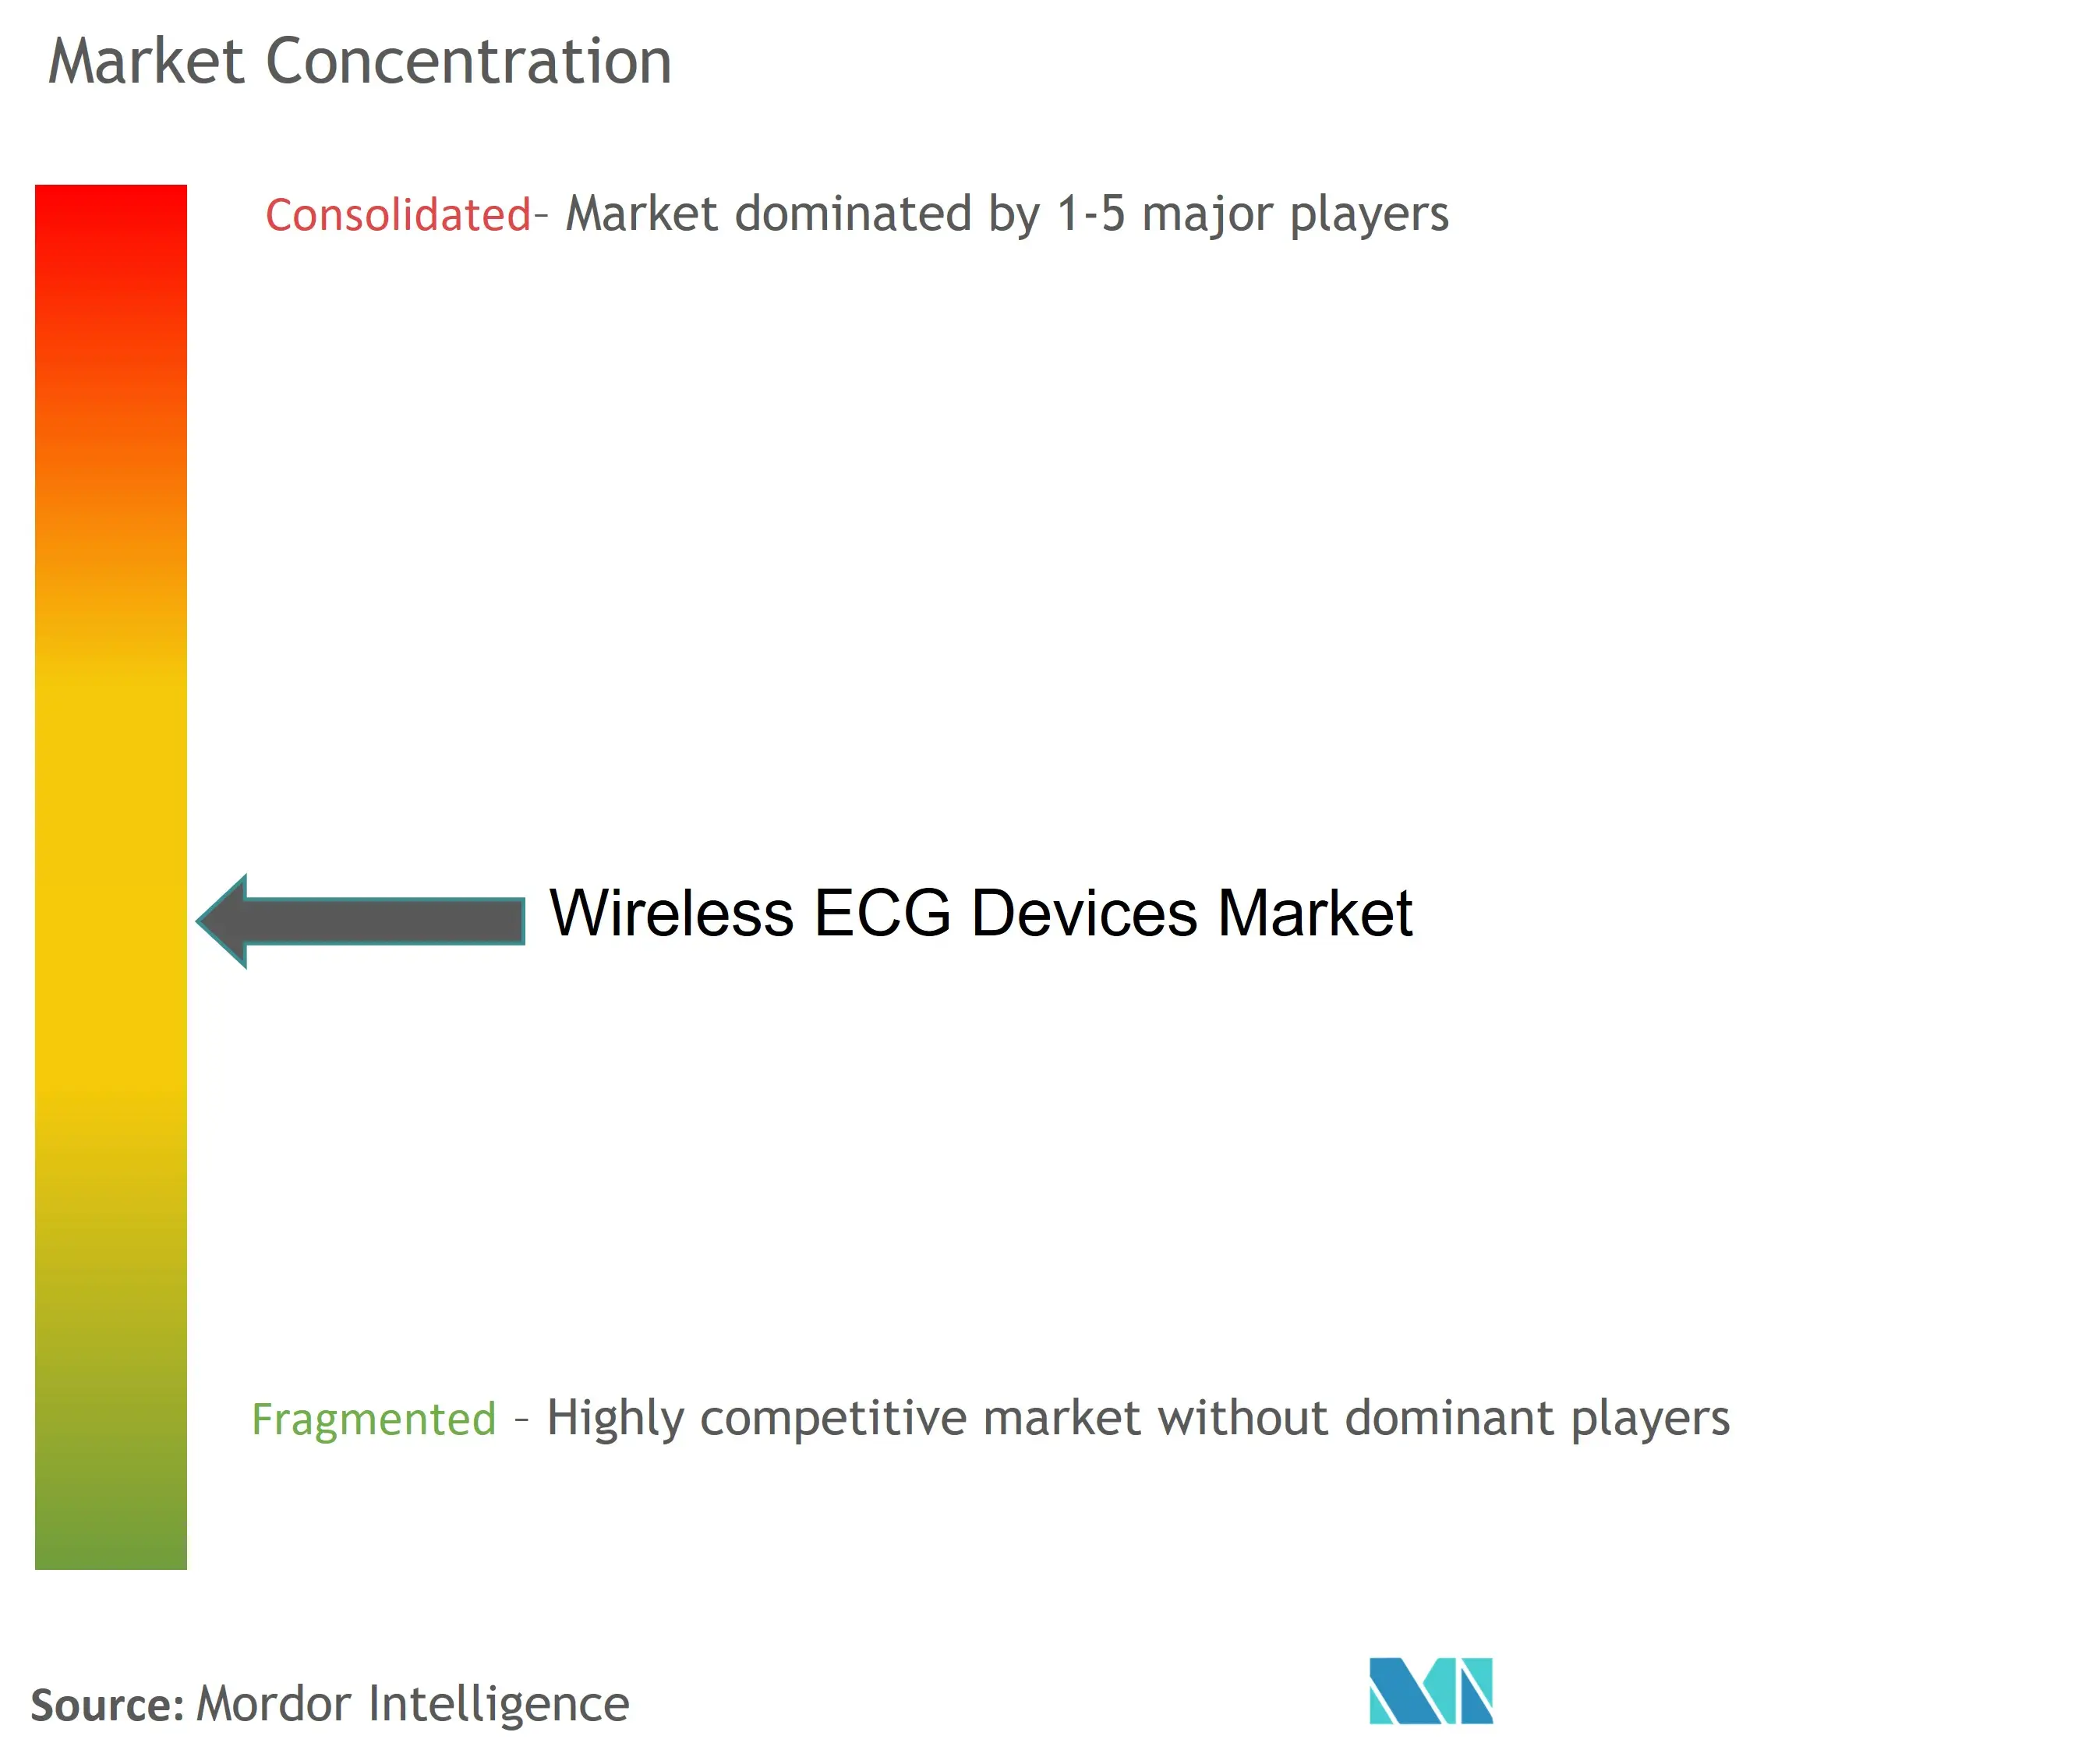 Wireless ECG Devices Market Concentration